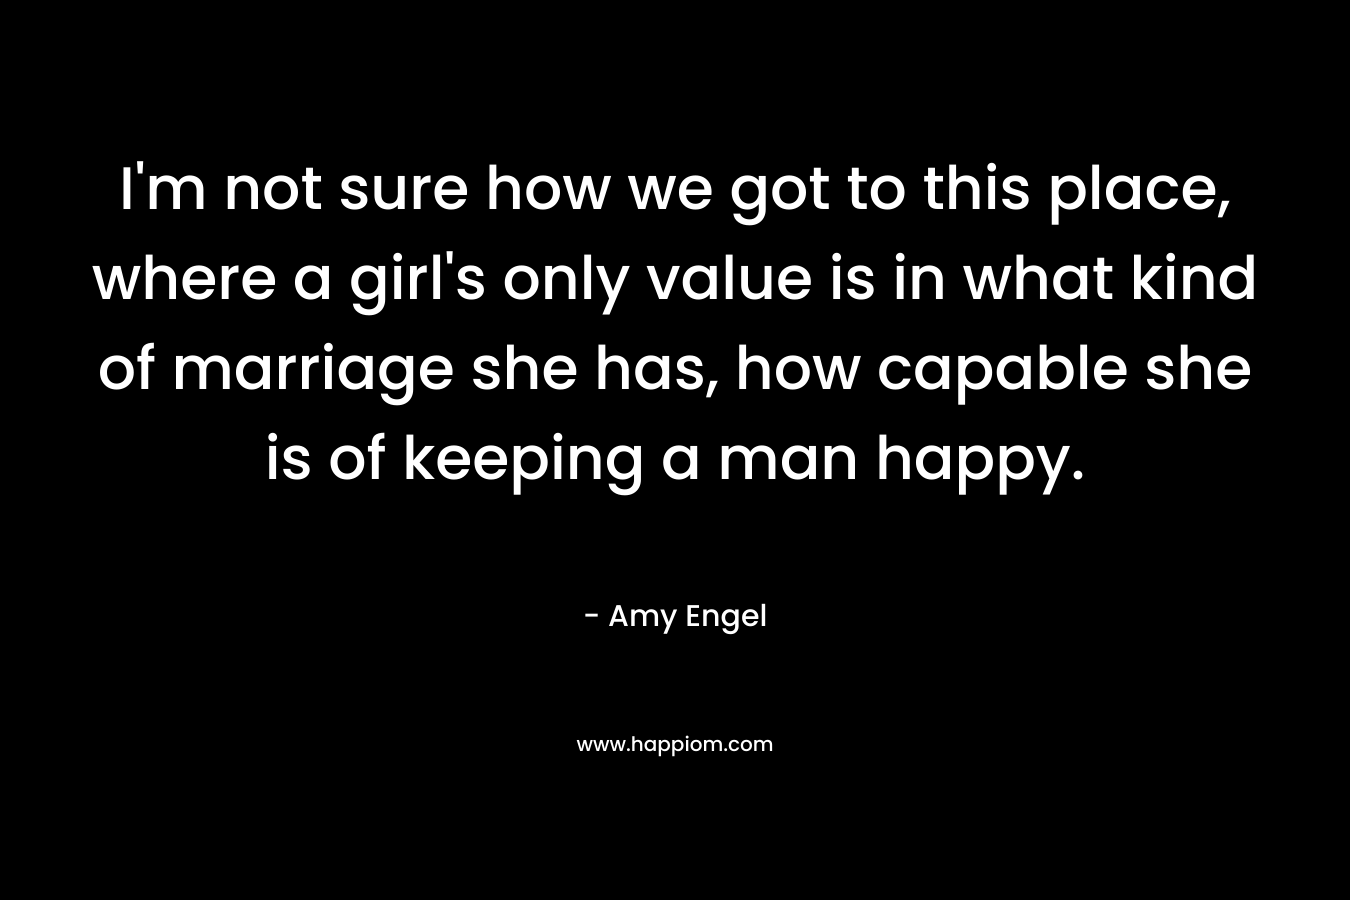 I’m not sure how we got to this place, where a girl’s only value is in what kind of marriage she has, how capable she is of keeping a man happy. – Amy Engel